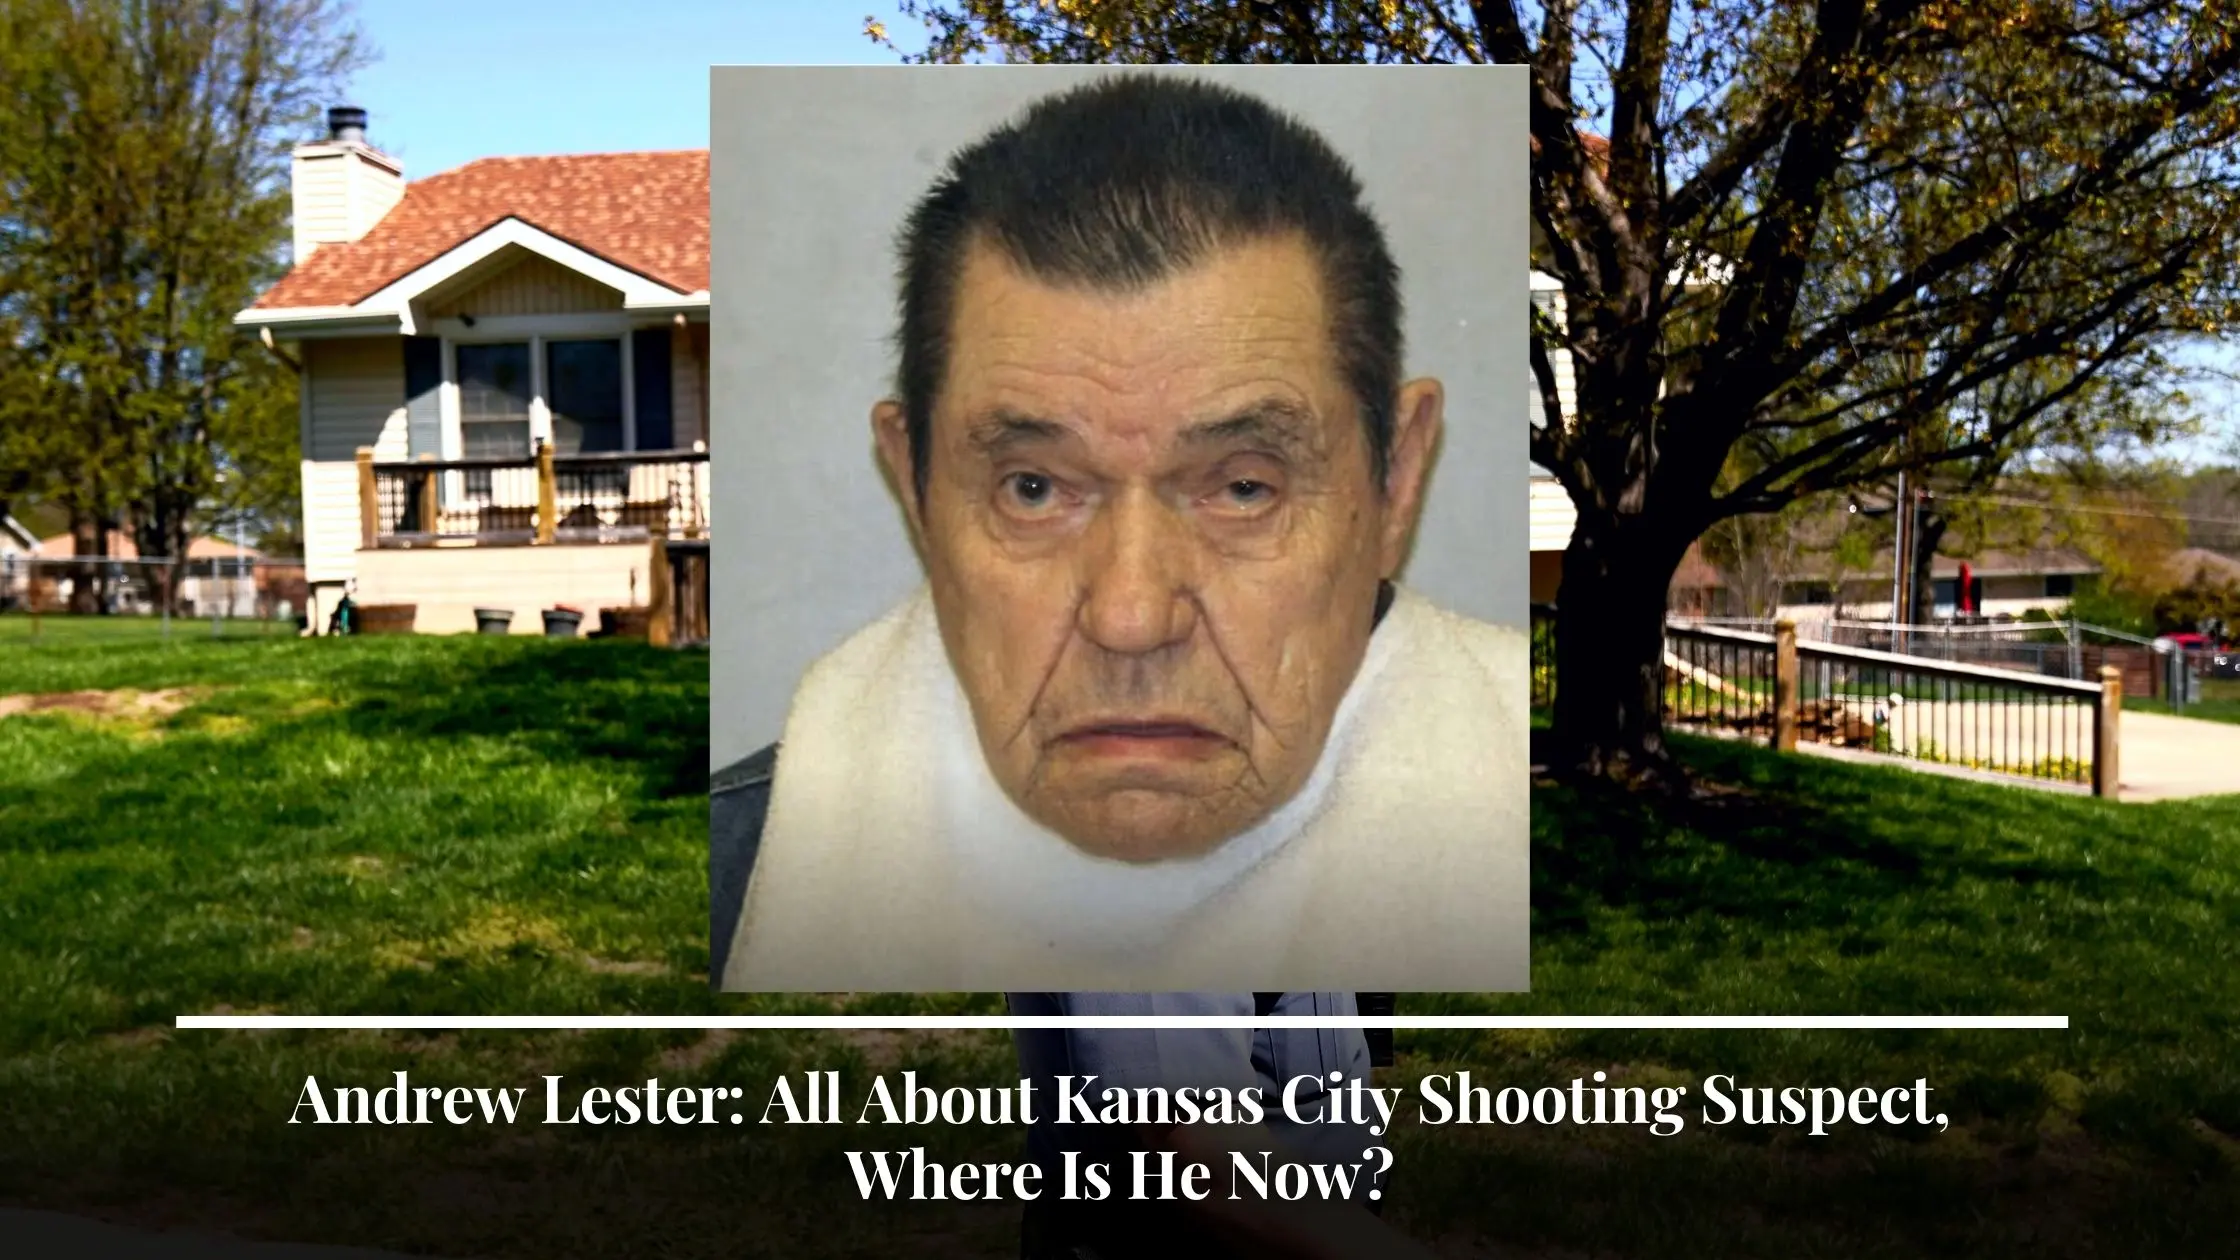 Andrew Lester All About Kansas City Shooting Suspect, Where Is He Now